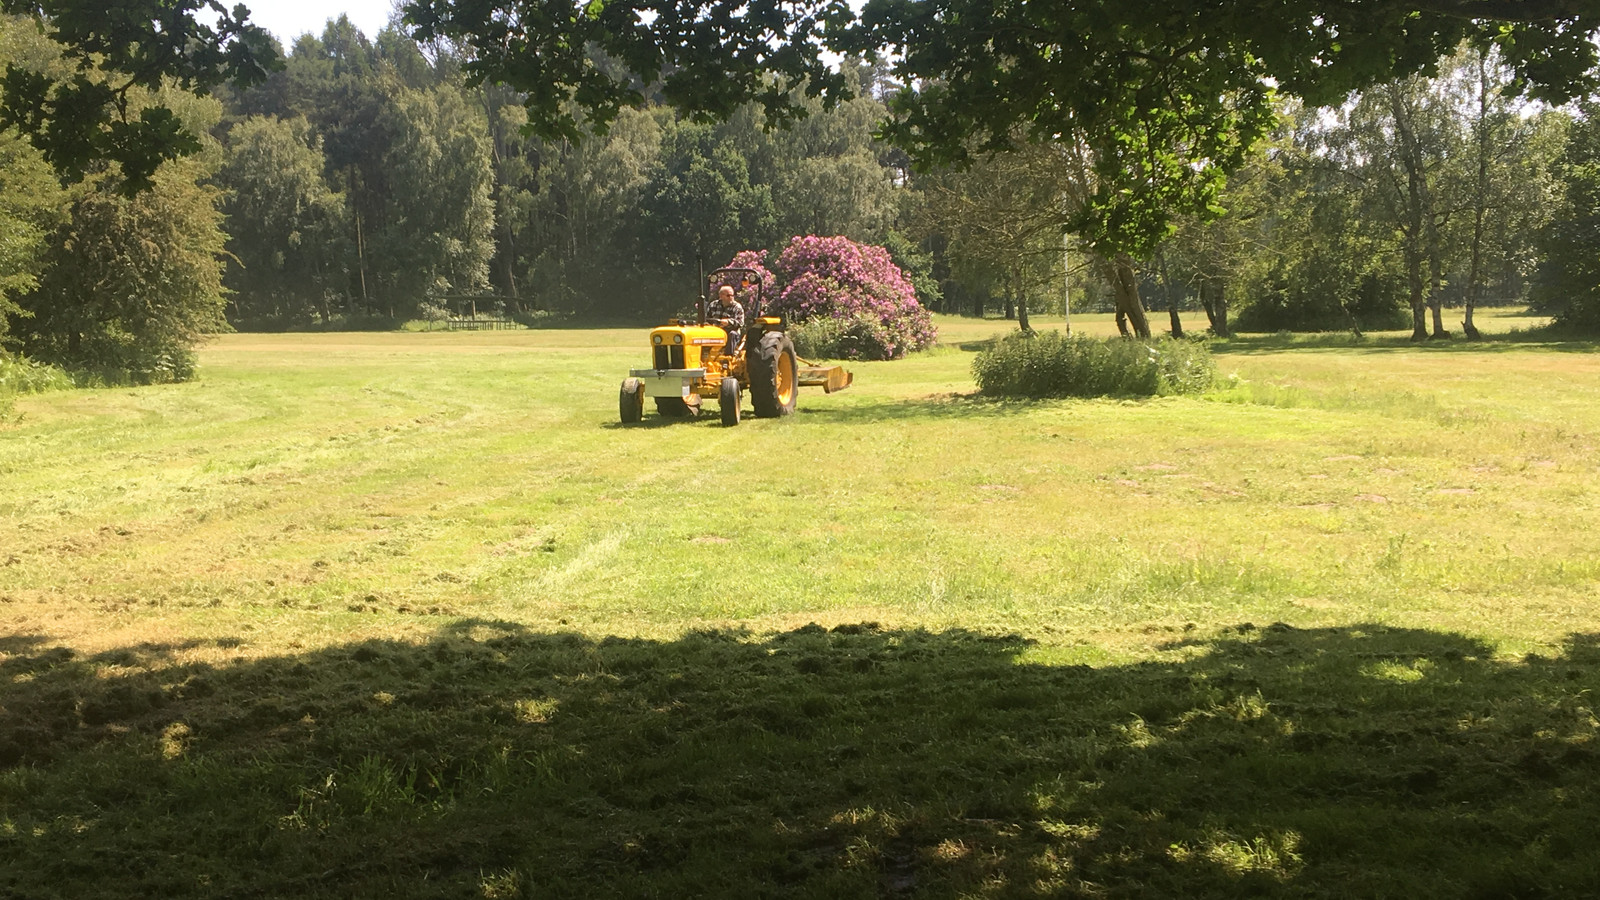 Mowing the 'lawn'...